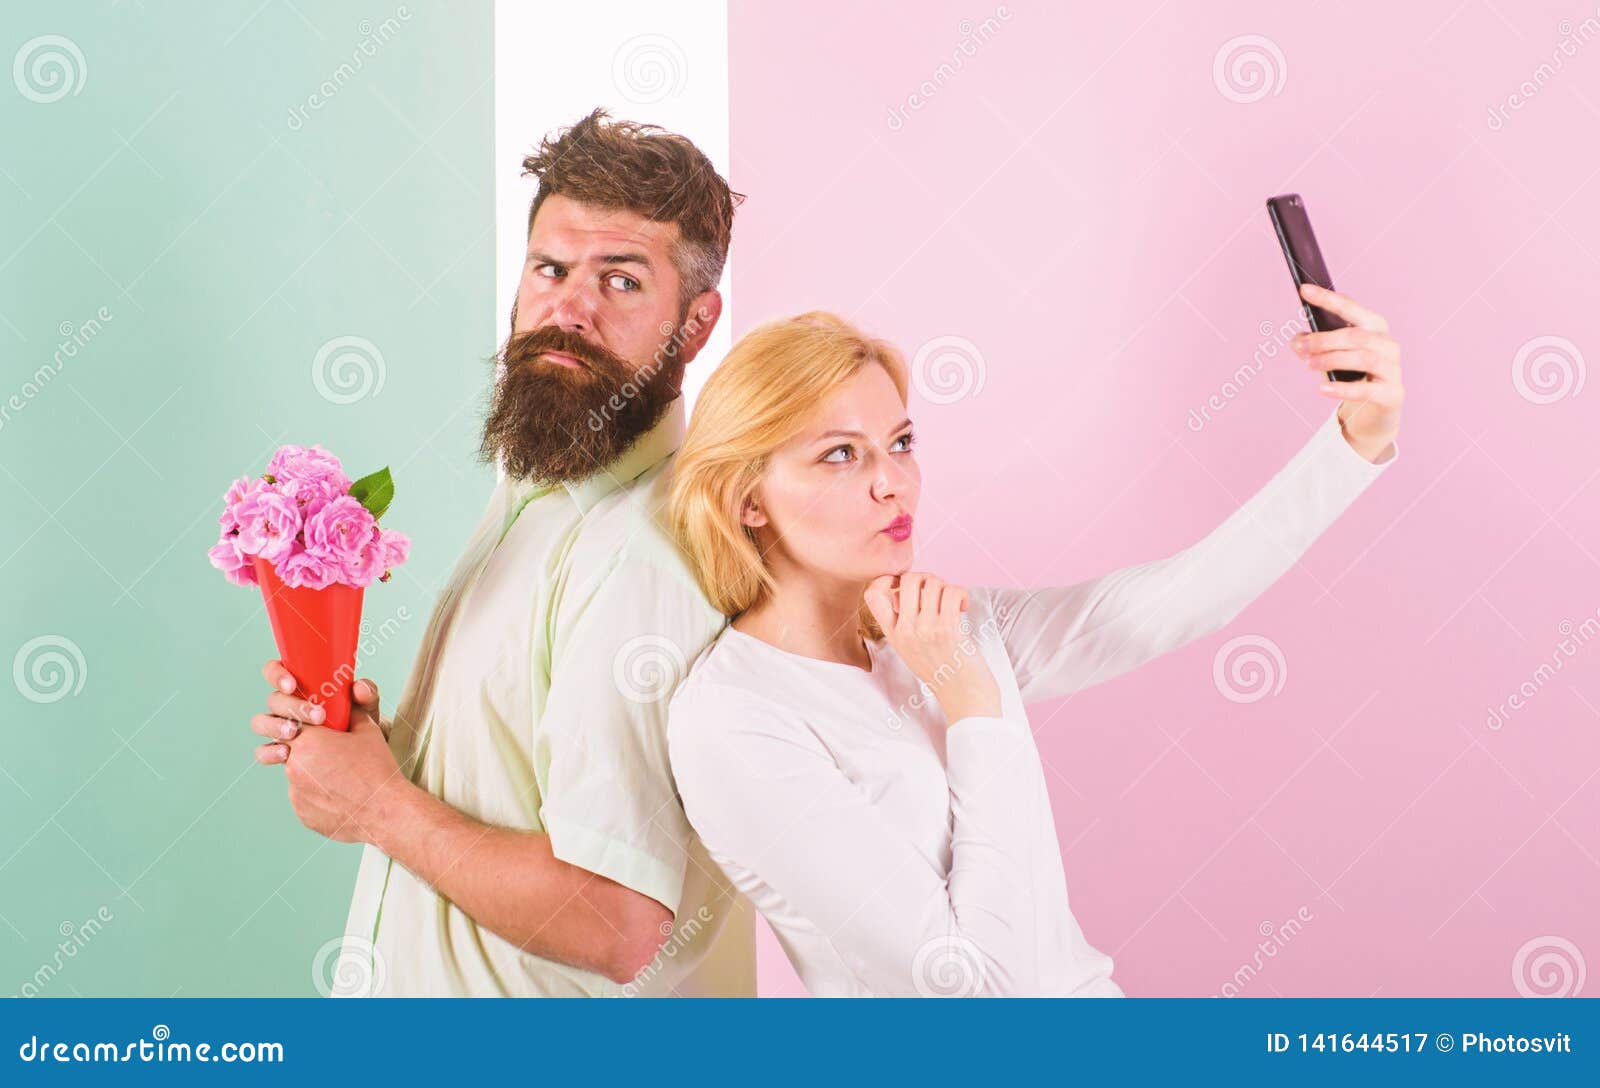 sharing happy selfie. woman capturing happy moment boyfriend bring bouquet flowers. capturing moment to memorize. taking